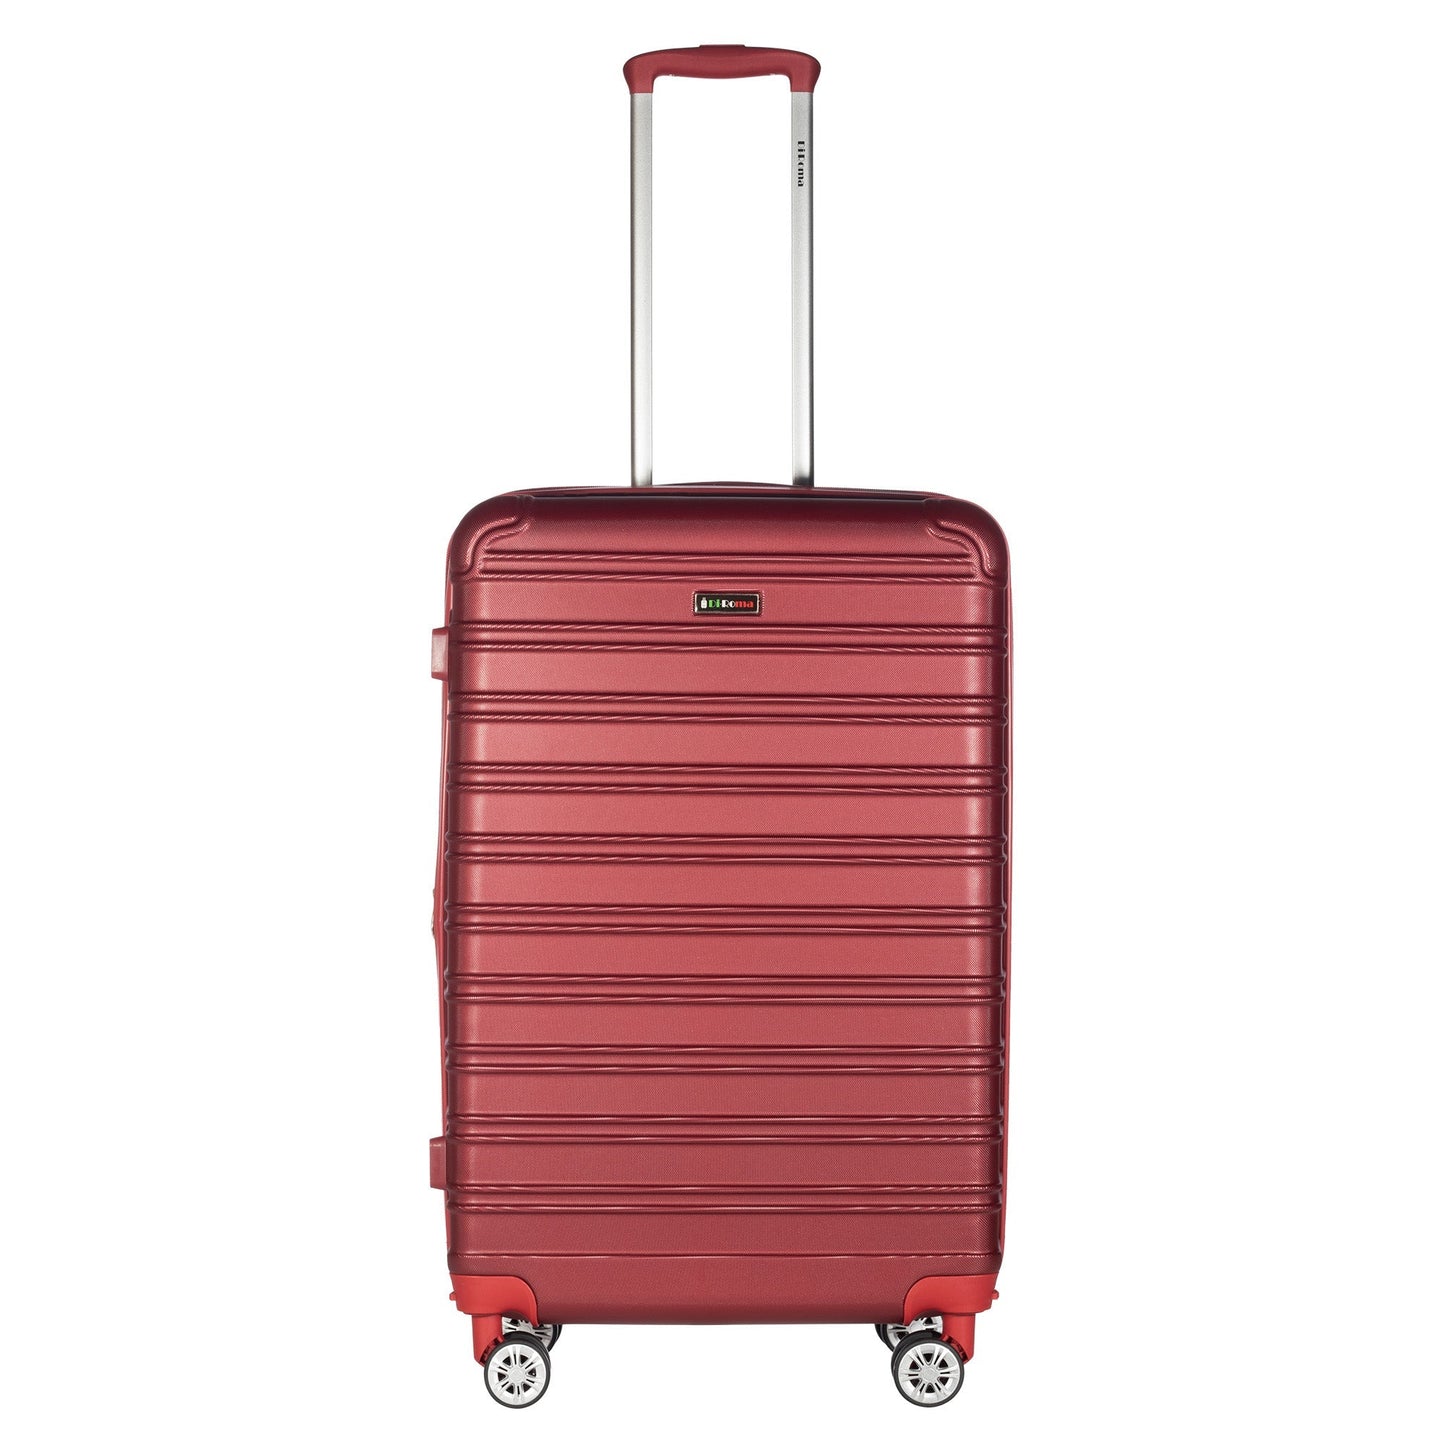 King Collection 4pc Red luggage (20/26/28/30") Suitcase Lock Spinner Hard